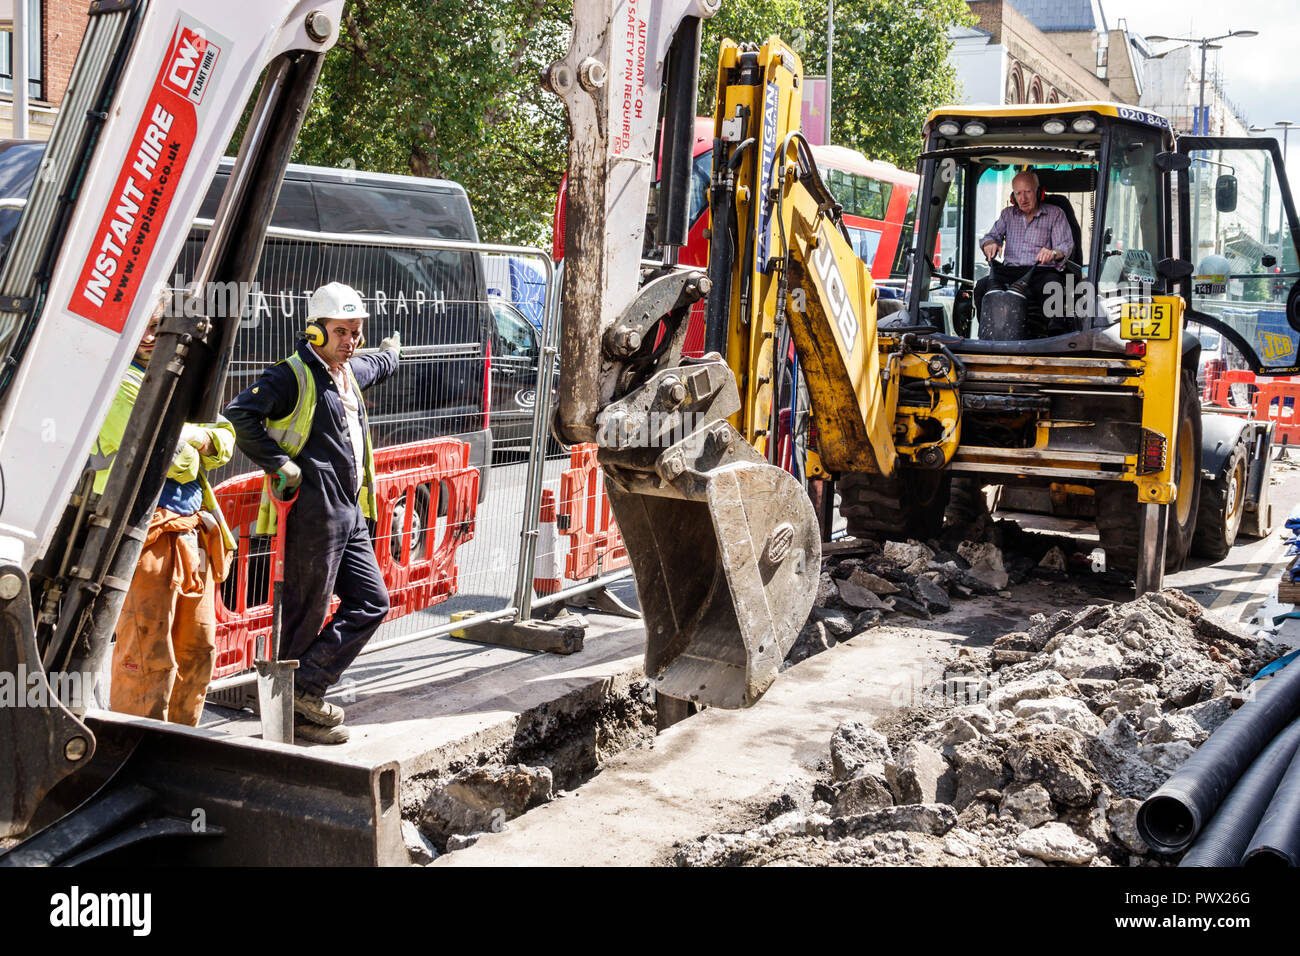 London England,UK,Lambeth South Bank,road pavement repair construction,public works infrastructure,digging,digger heavy equipment laborer,worker,hard Stock Photo